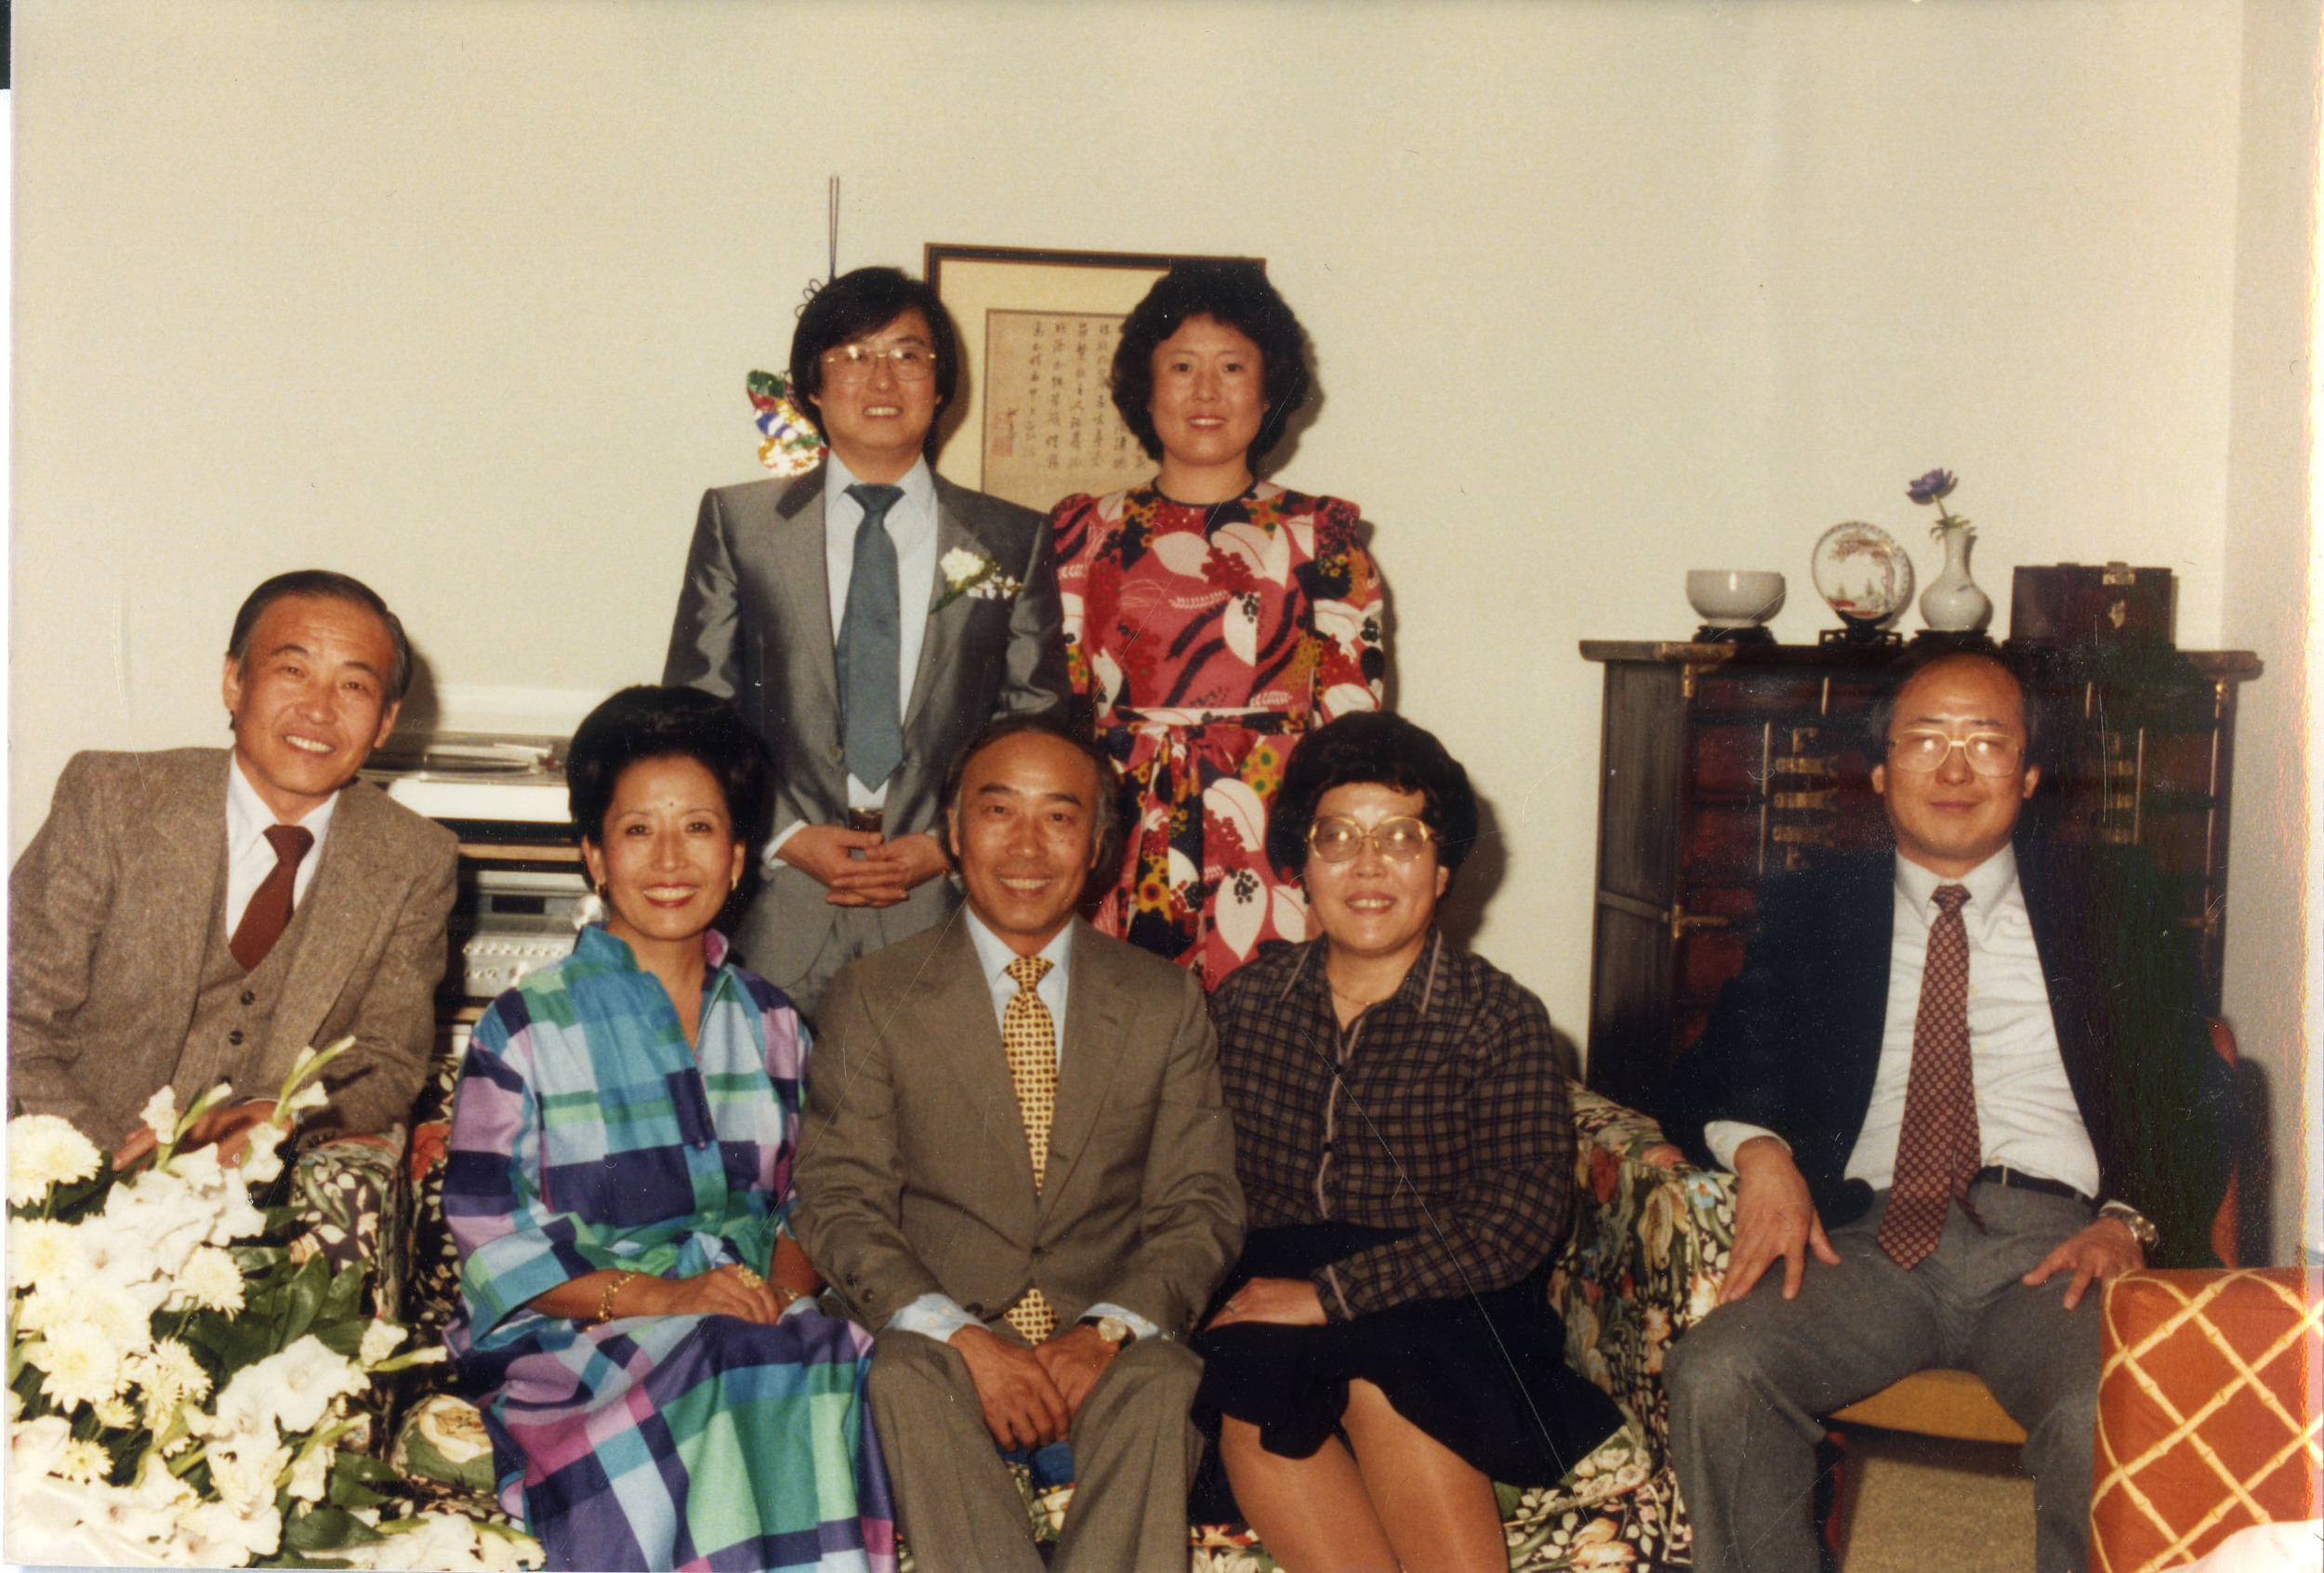 With his siblings, in New Jersey, circa 1984